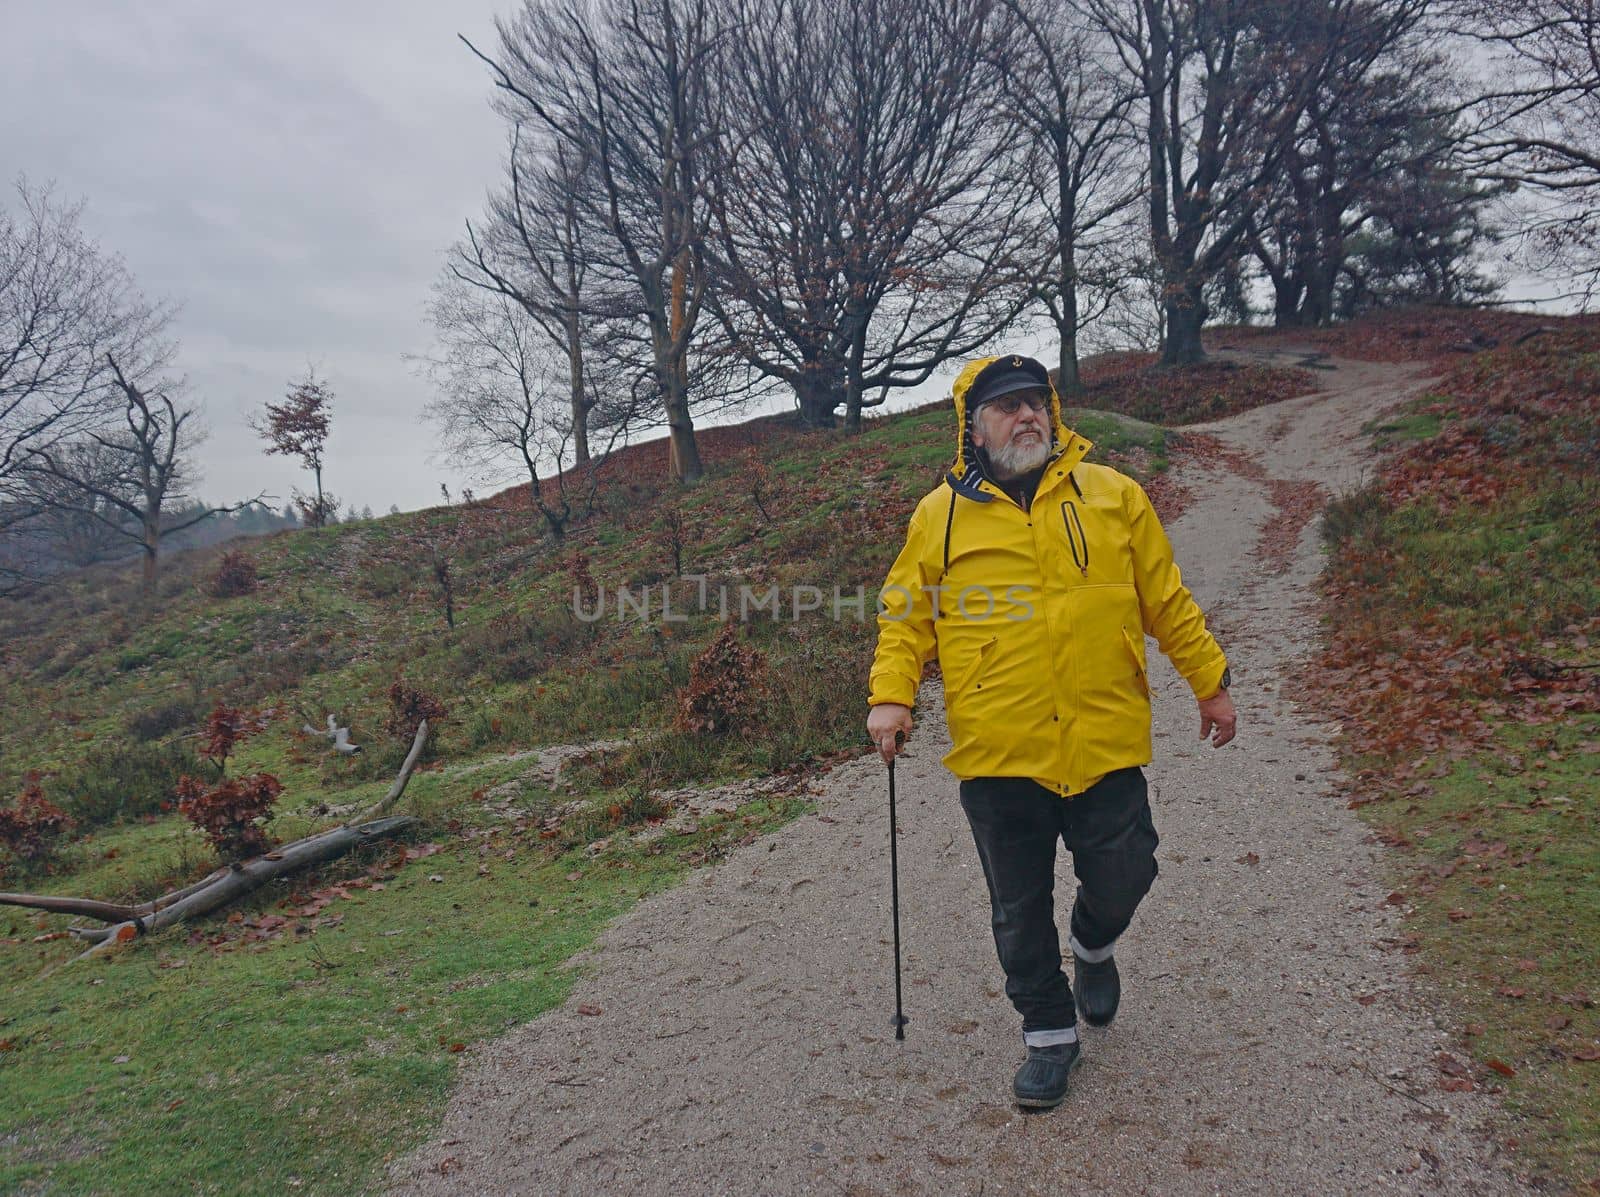 An elderly man goes downhill in a moorland on a rainy day. He wears a yellow raincoat over his clothes. The heath area is a well-known one in the Netherlands: the Posbank